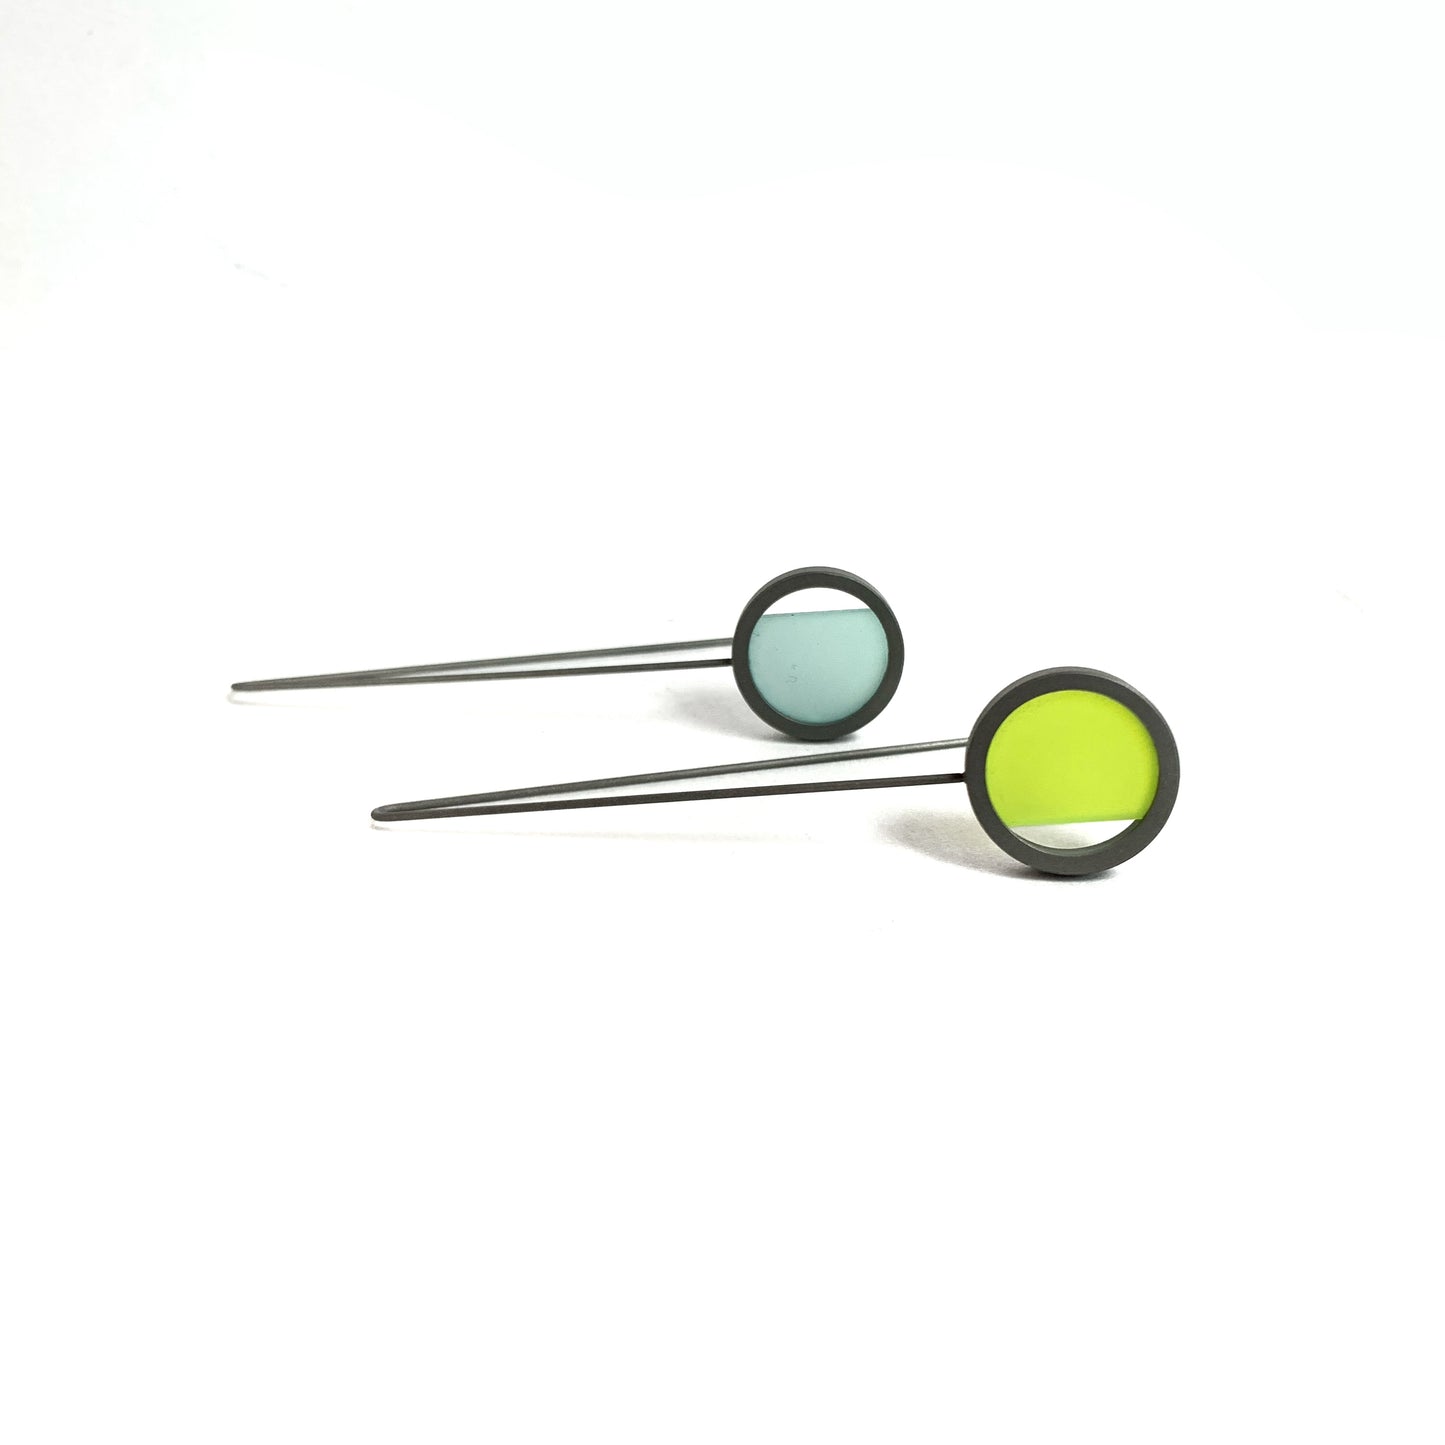 Round Acrylic and Steel Earrings (long) - Collection 11 Earrings